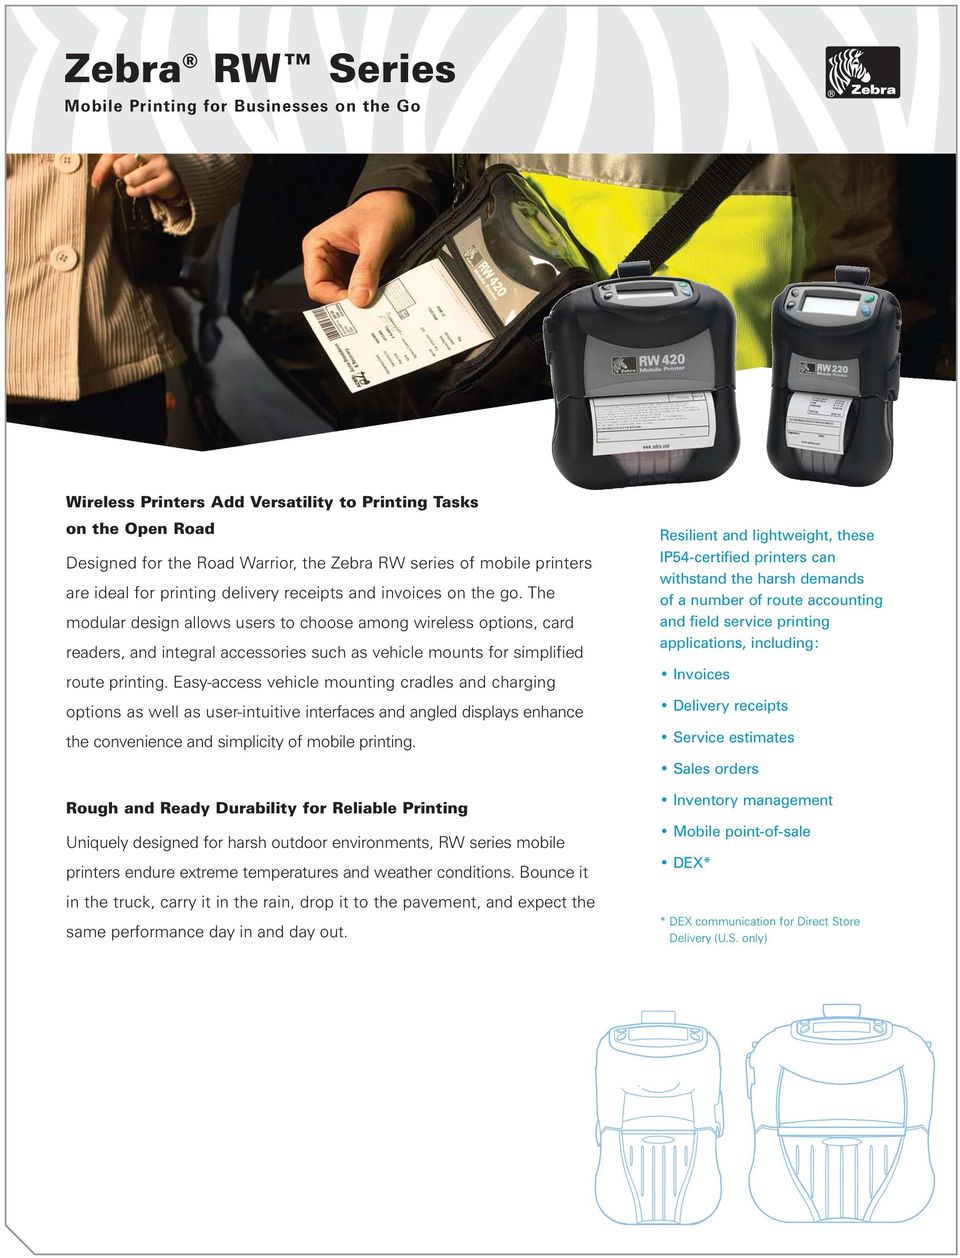 The modular design allows users to choose among wireless options, card readers, and integral accessories such as vehicle mounts for simplified route printing.